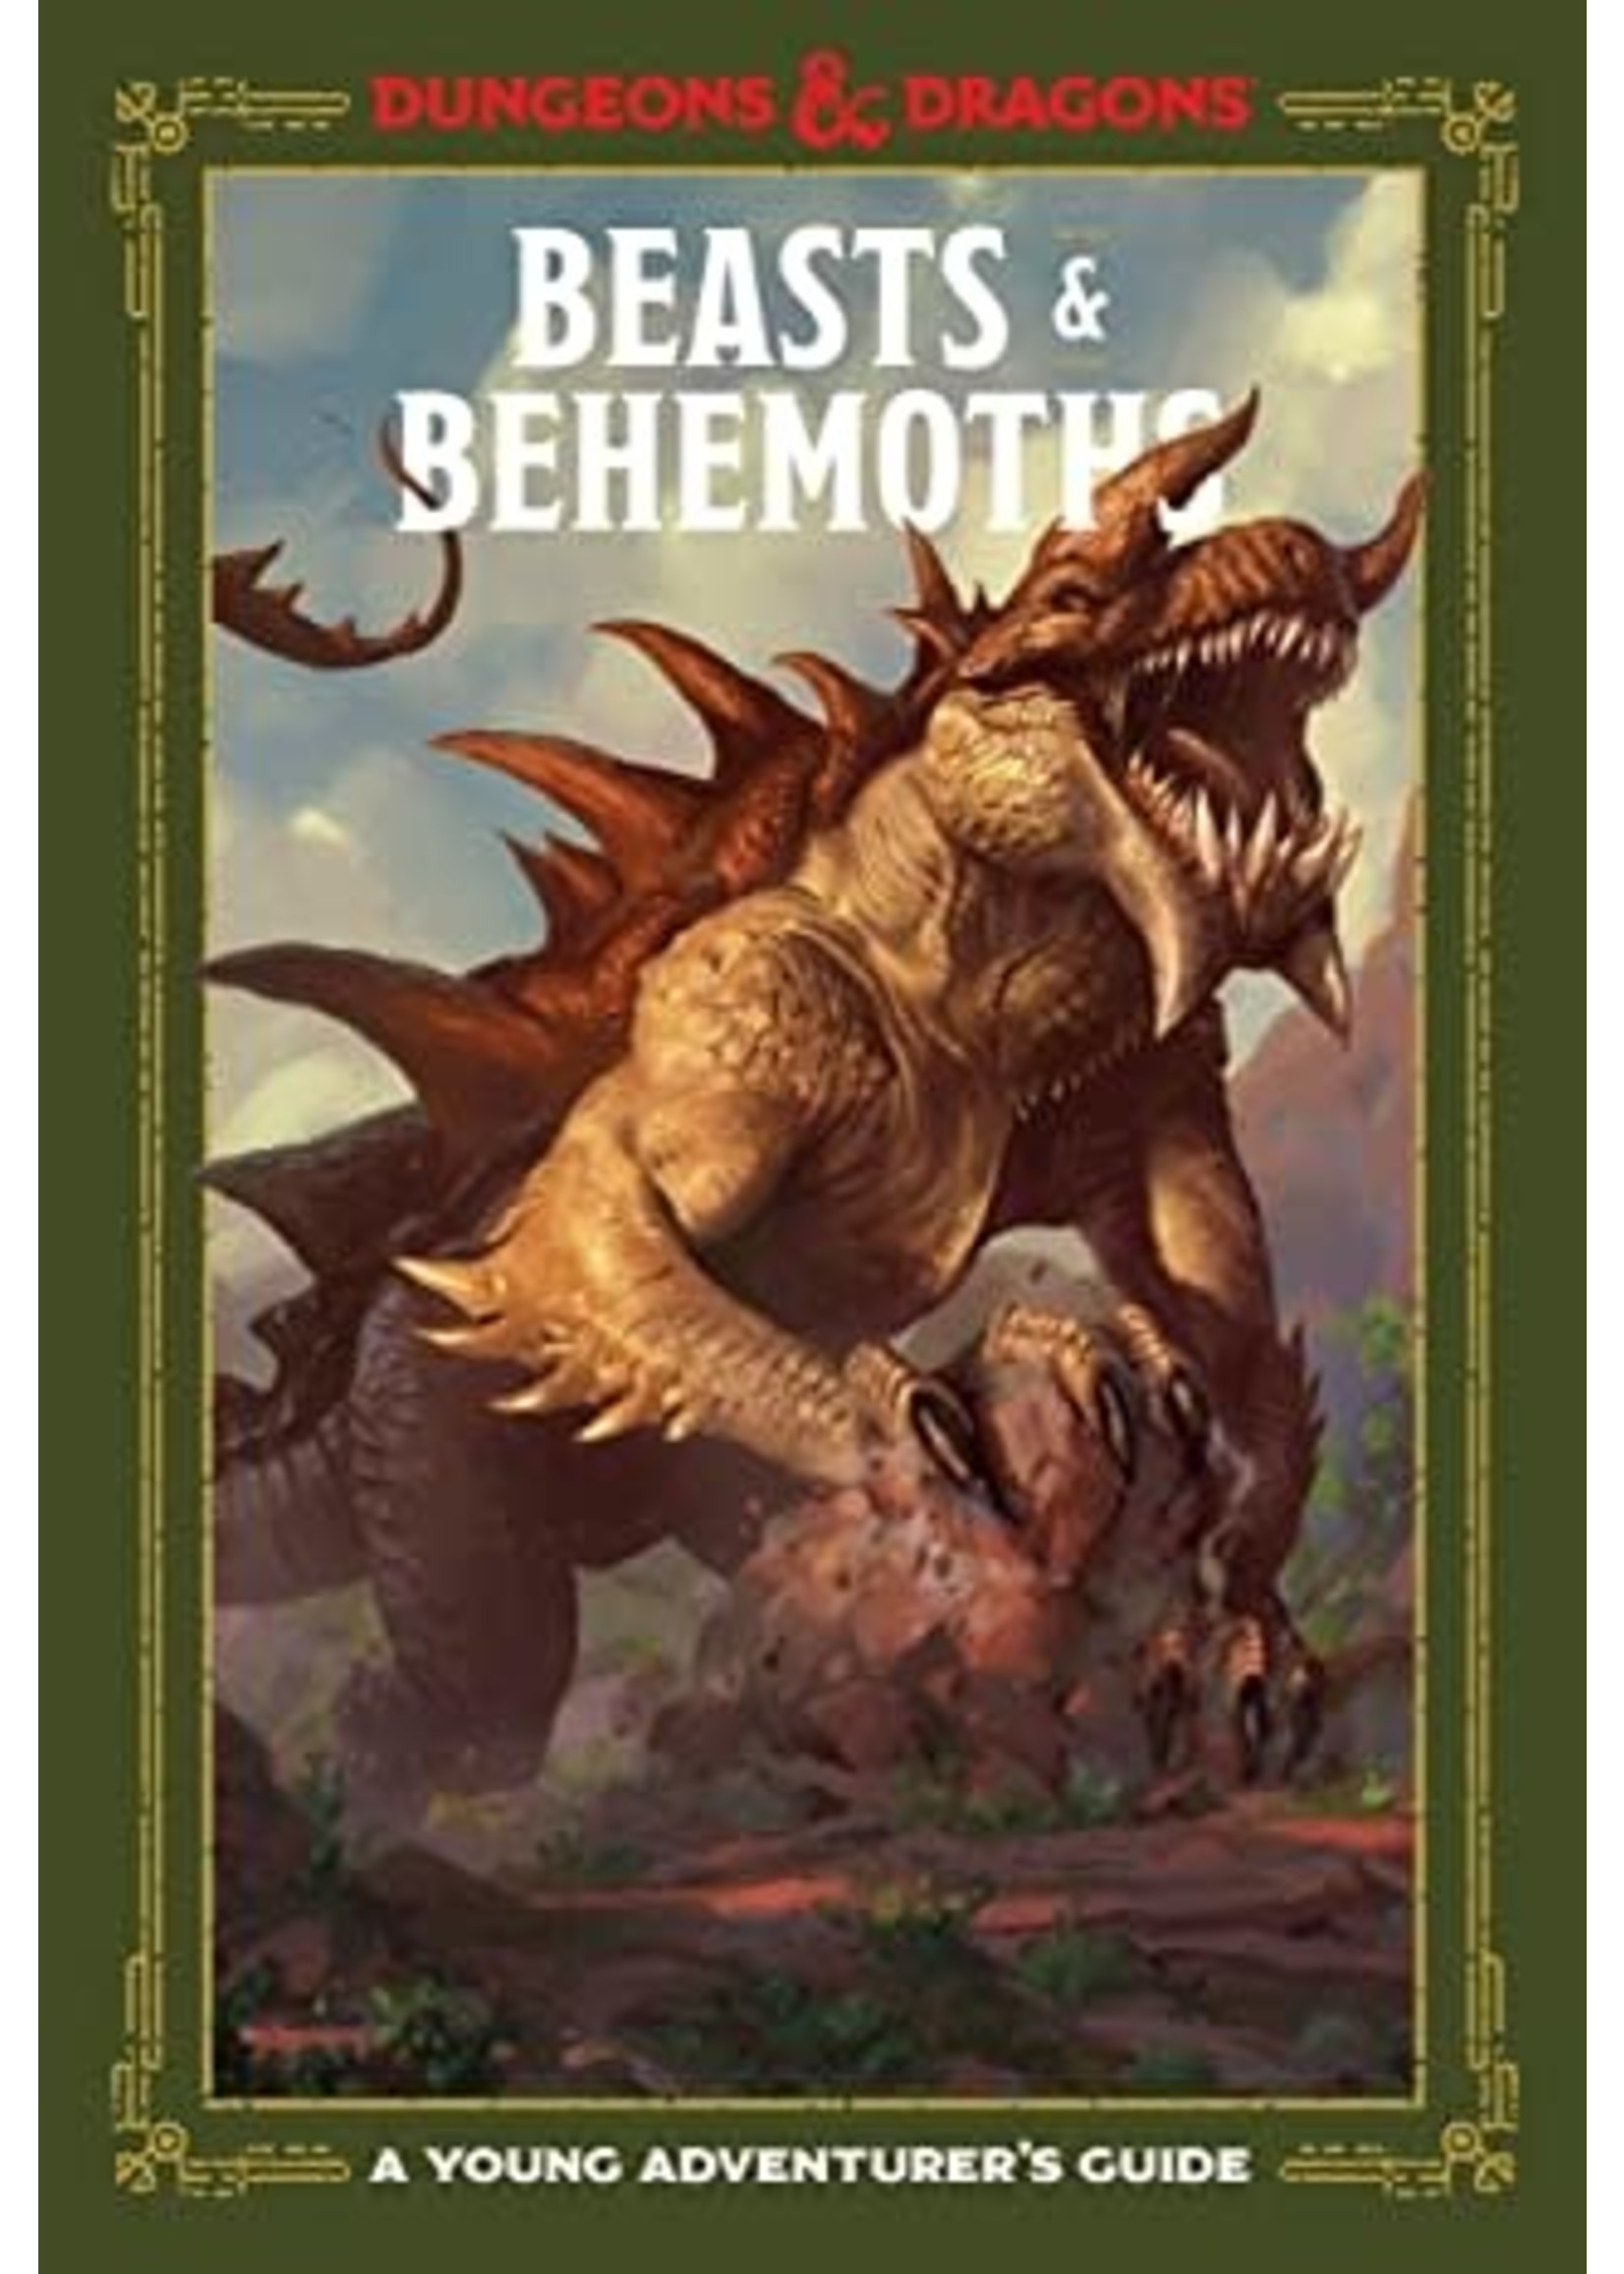 Beasts & Behemoths by Jim Zub,  Stacy King,  Andrew Wheeler,  Official Dungeons & Dragons Licensed